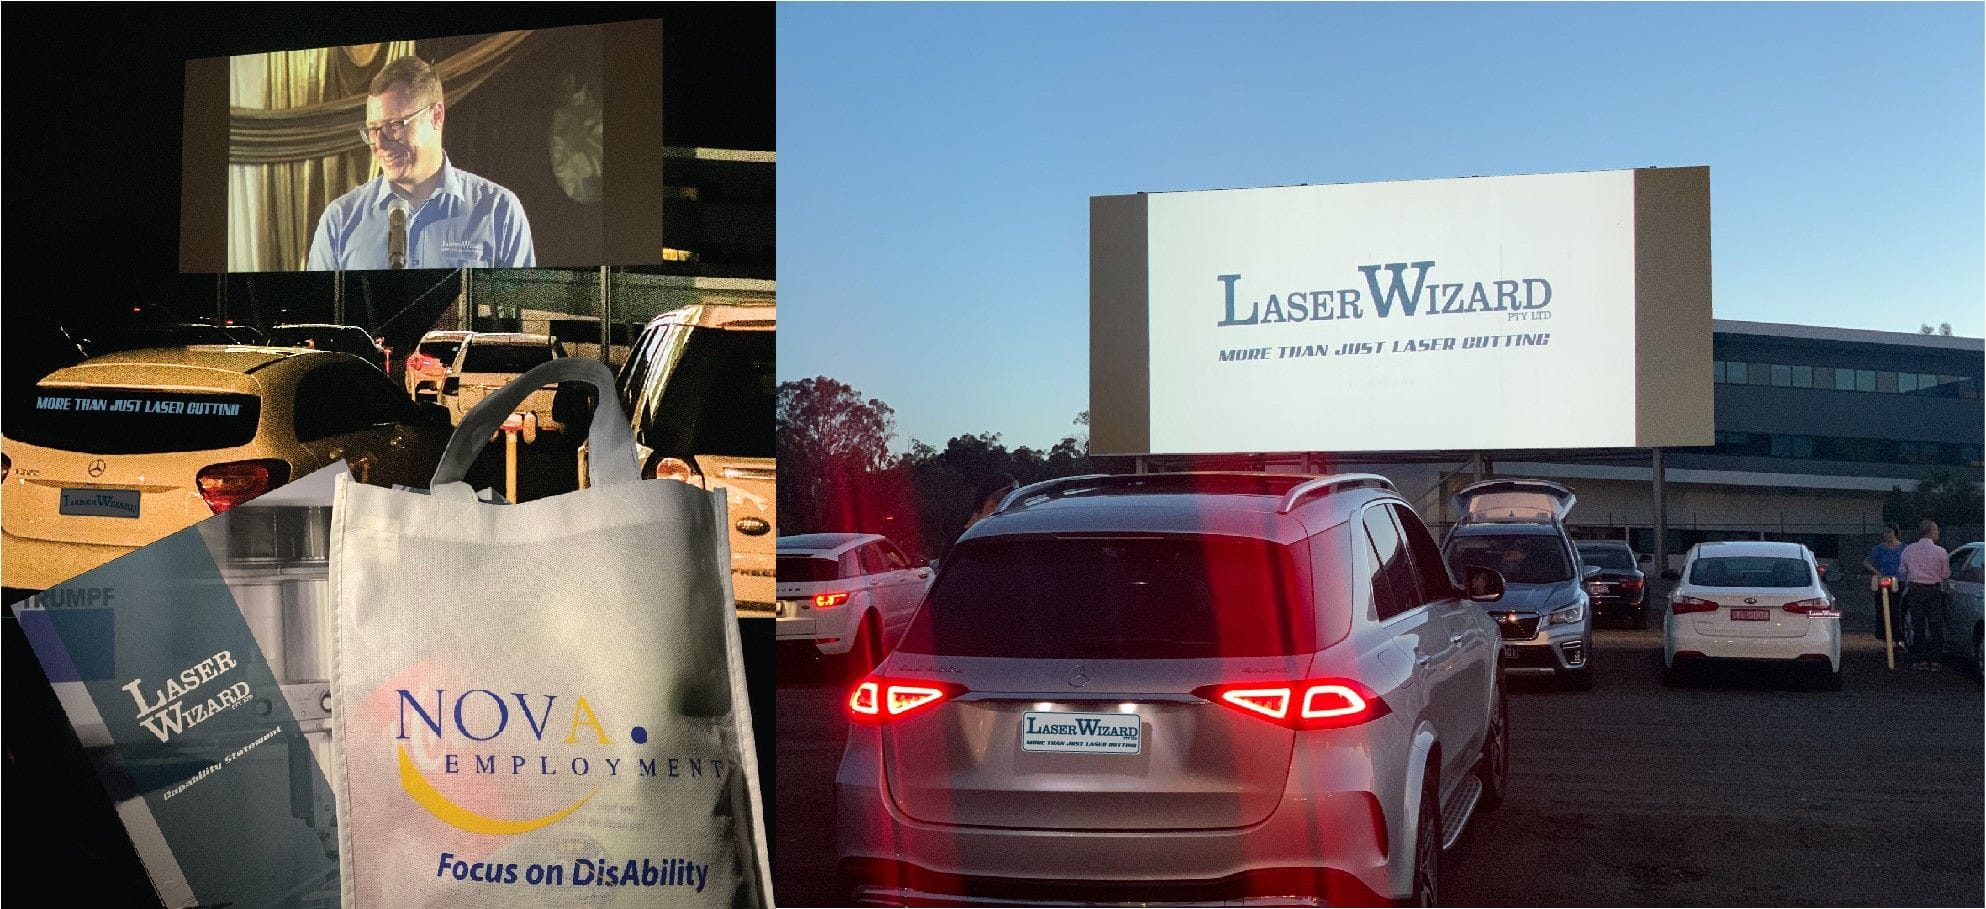 Laser Wizard & NOVA Employment - Together Supporting Inclusion & Diversity